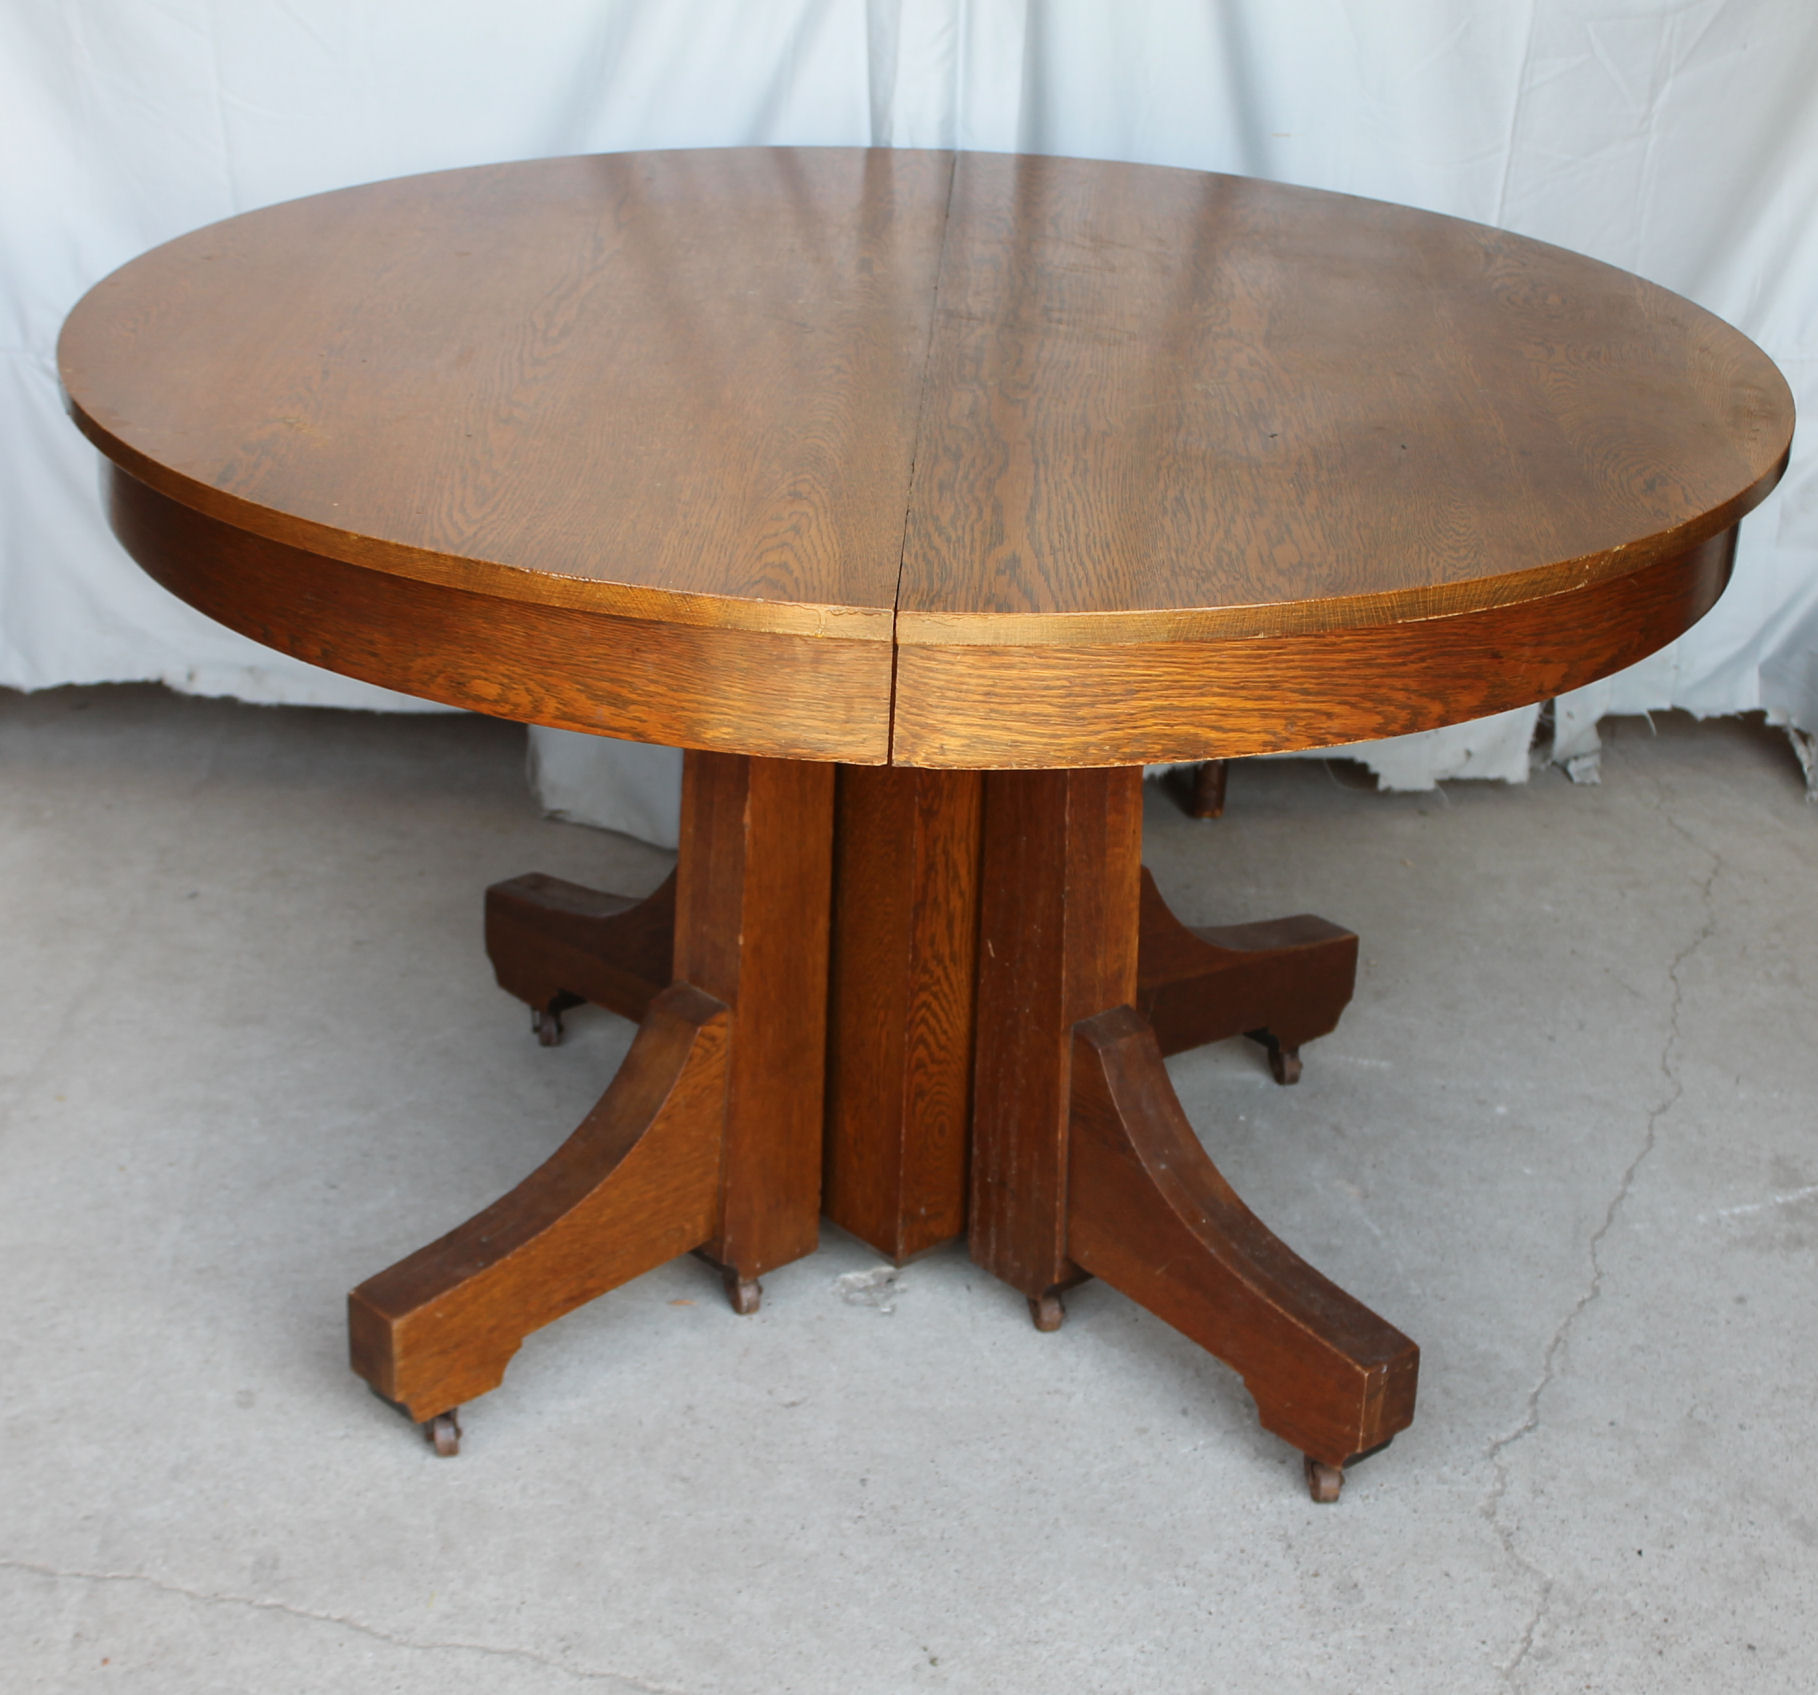 Antique Mission Style Round Oak Table, Vintage Round Oak Table And Chairs Set